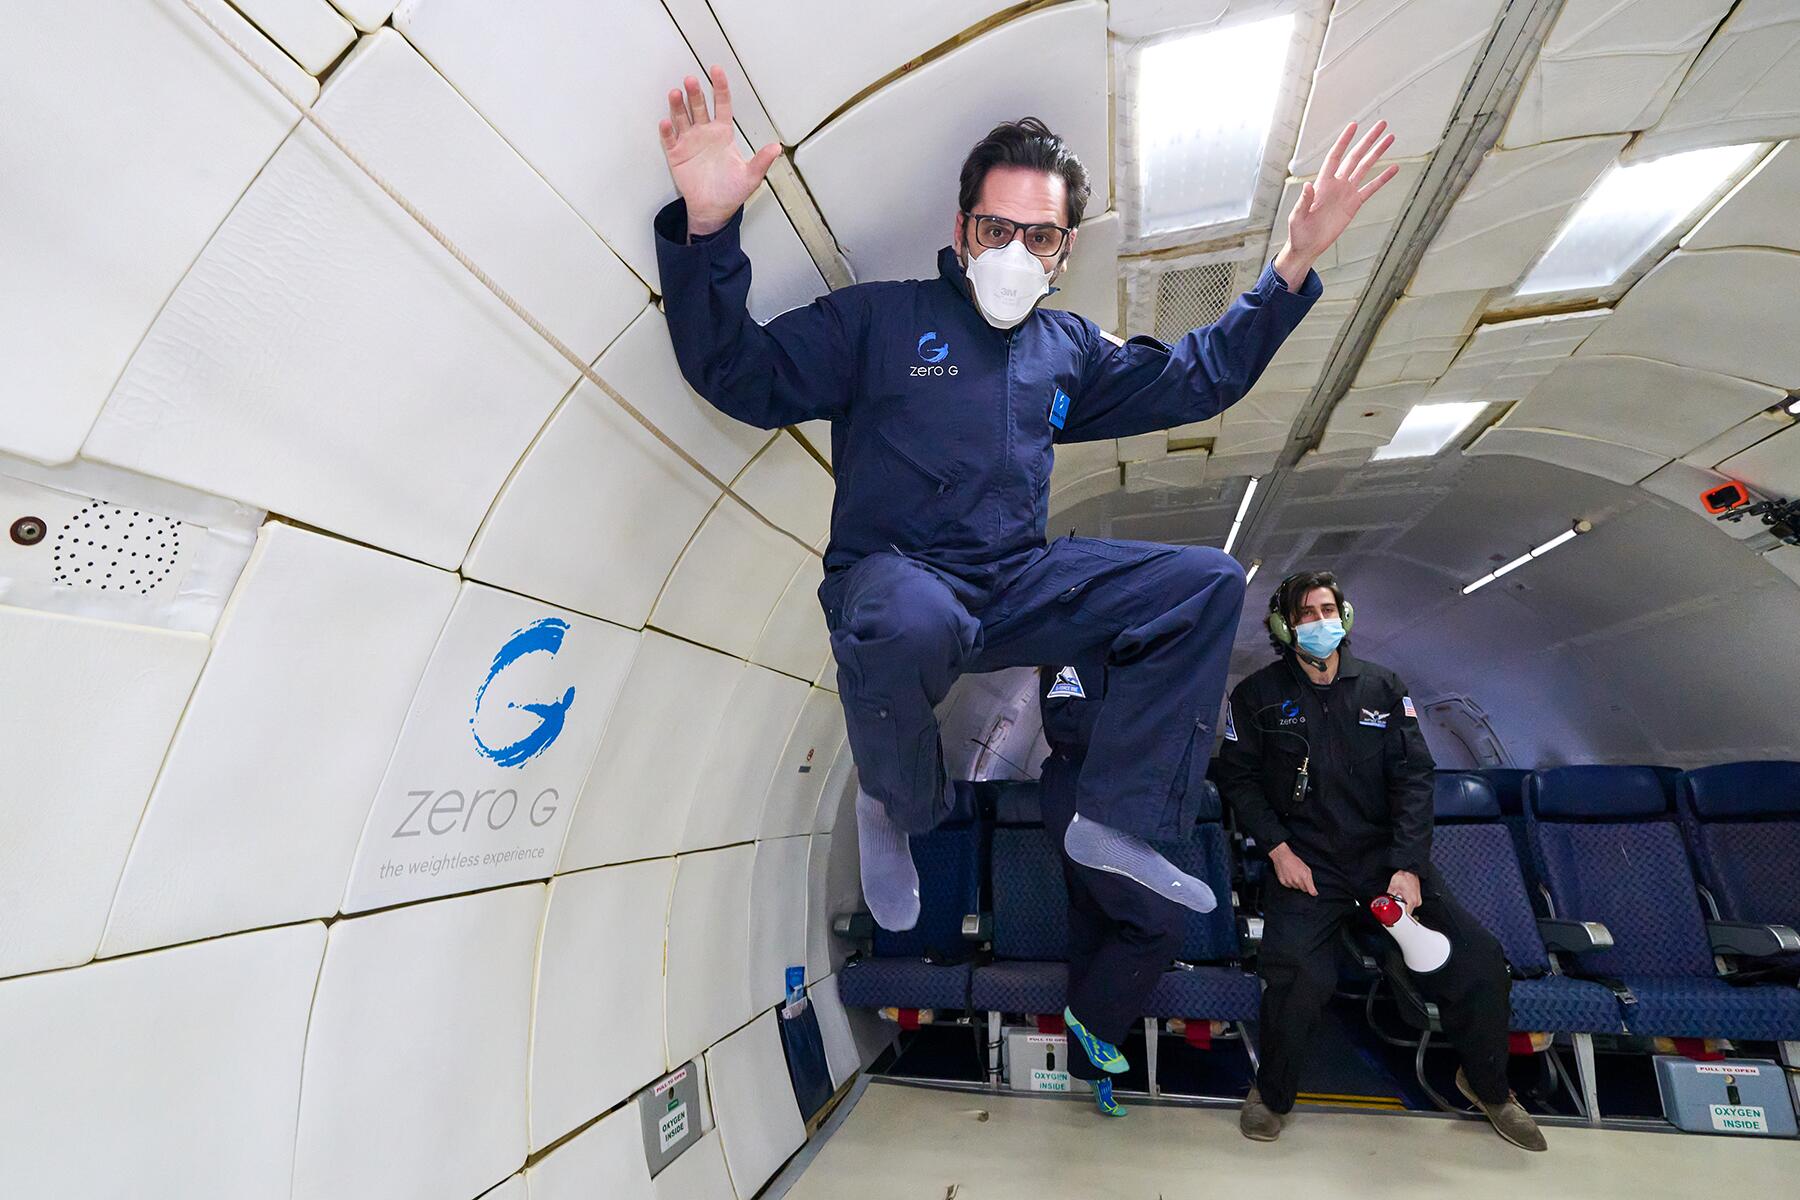 Zero-G reveals prepare for unbelievable absolutely no gravity musical shows